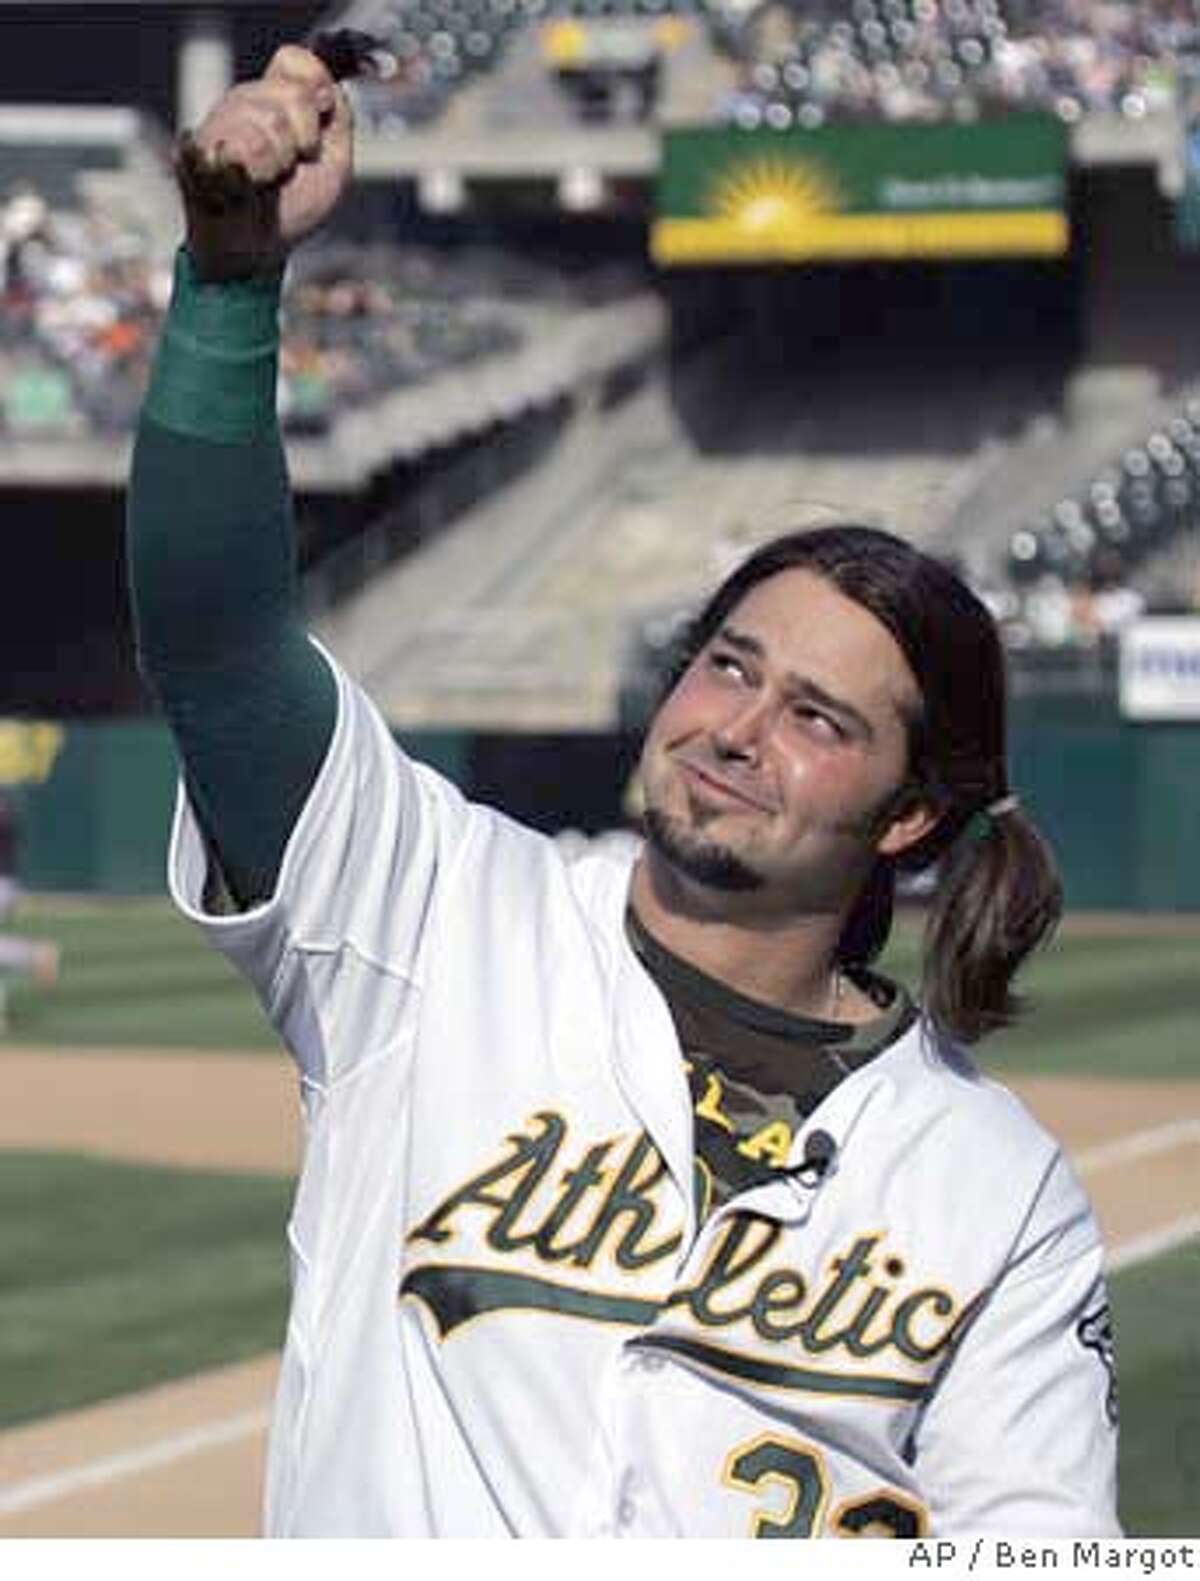 Oakland Athletics center fielder Nick Swisher holds his ponytail of hair cut at home plate by his father, former major league baseball player Steve Swisher, prior to the baseball game with the San Francisco Giants Saturday, May 19, 2007, in Oakland, Calif. Swisher had not cut his hair since the beginning of spring training, with the intention of donating his locks for a wig to be made for a woman with cancer, in honor of his grandmother who died of the illness. (AP Photo/Ben Margot)